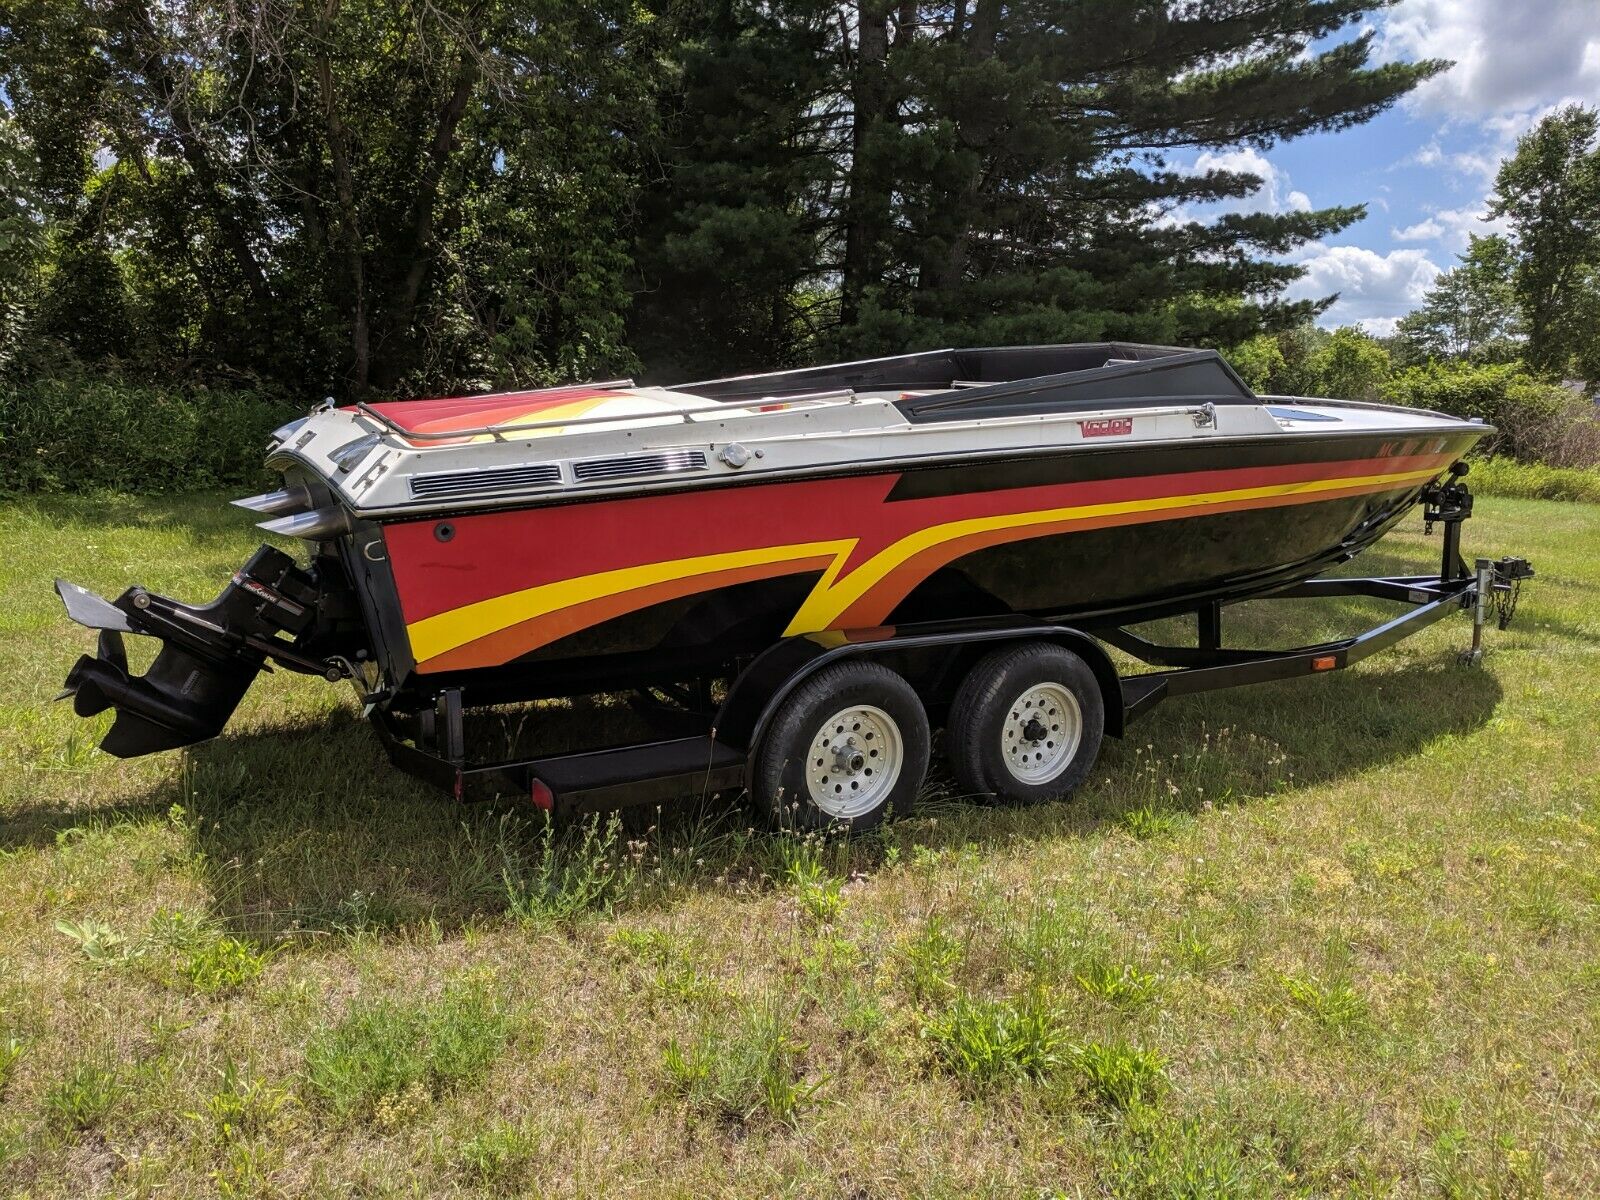 Vector 24 PYTHON 1989 for sale for $8,500 - Boats-from-USA.com